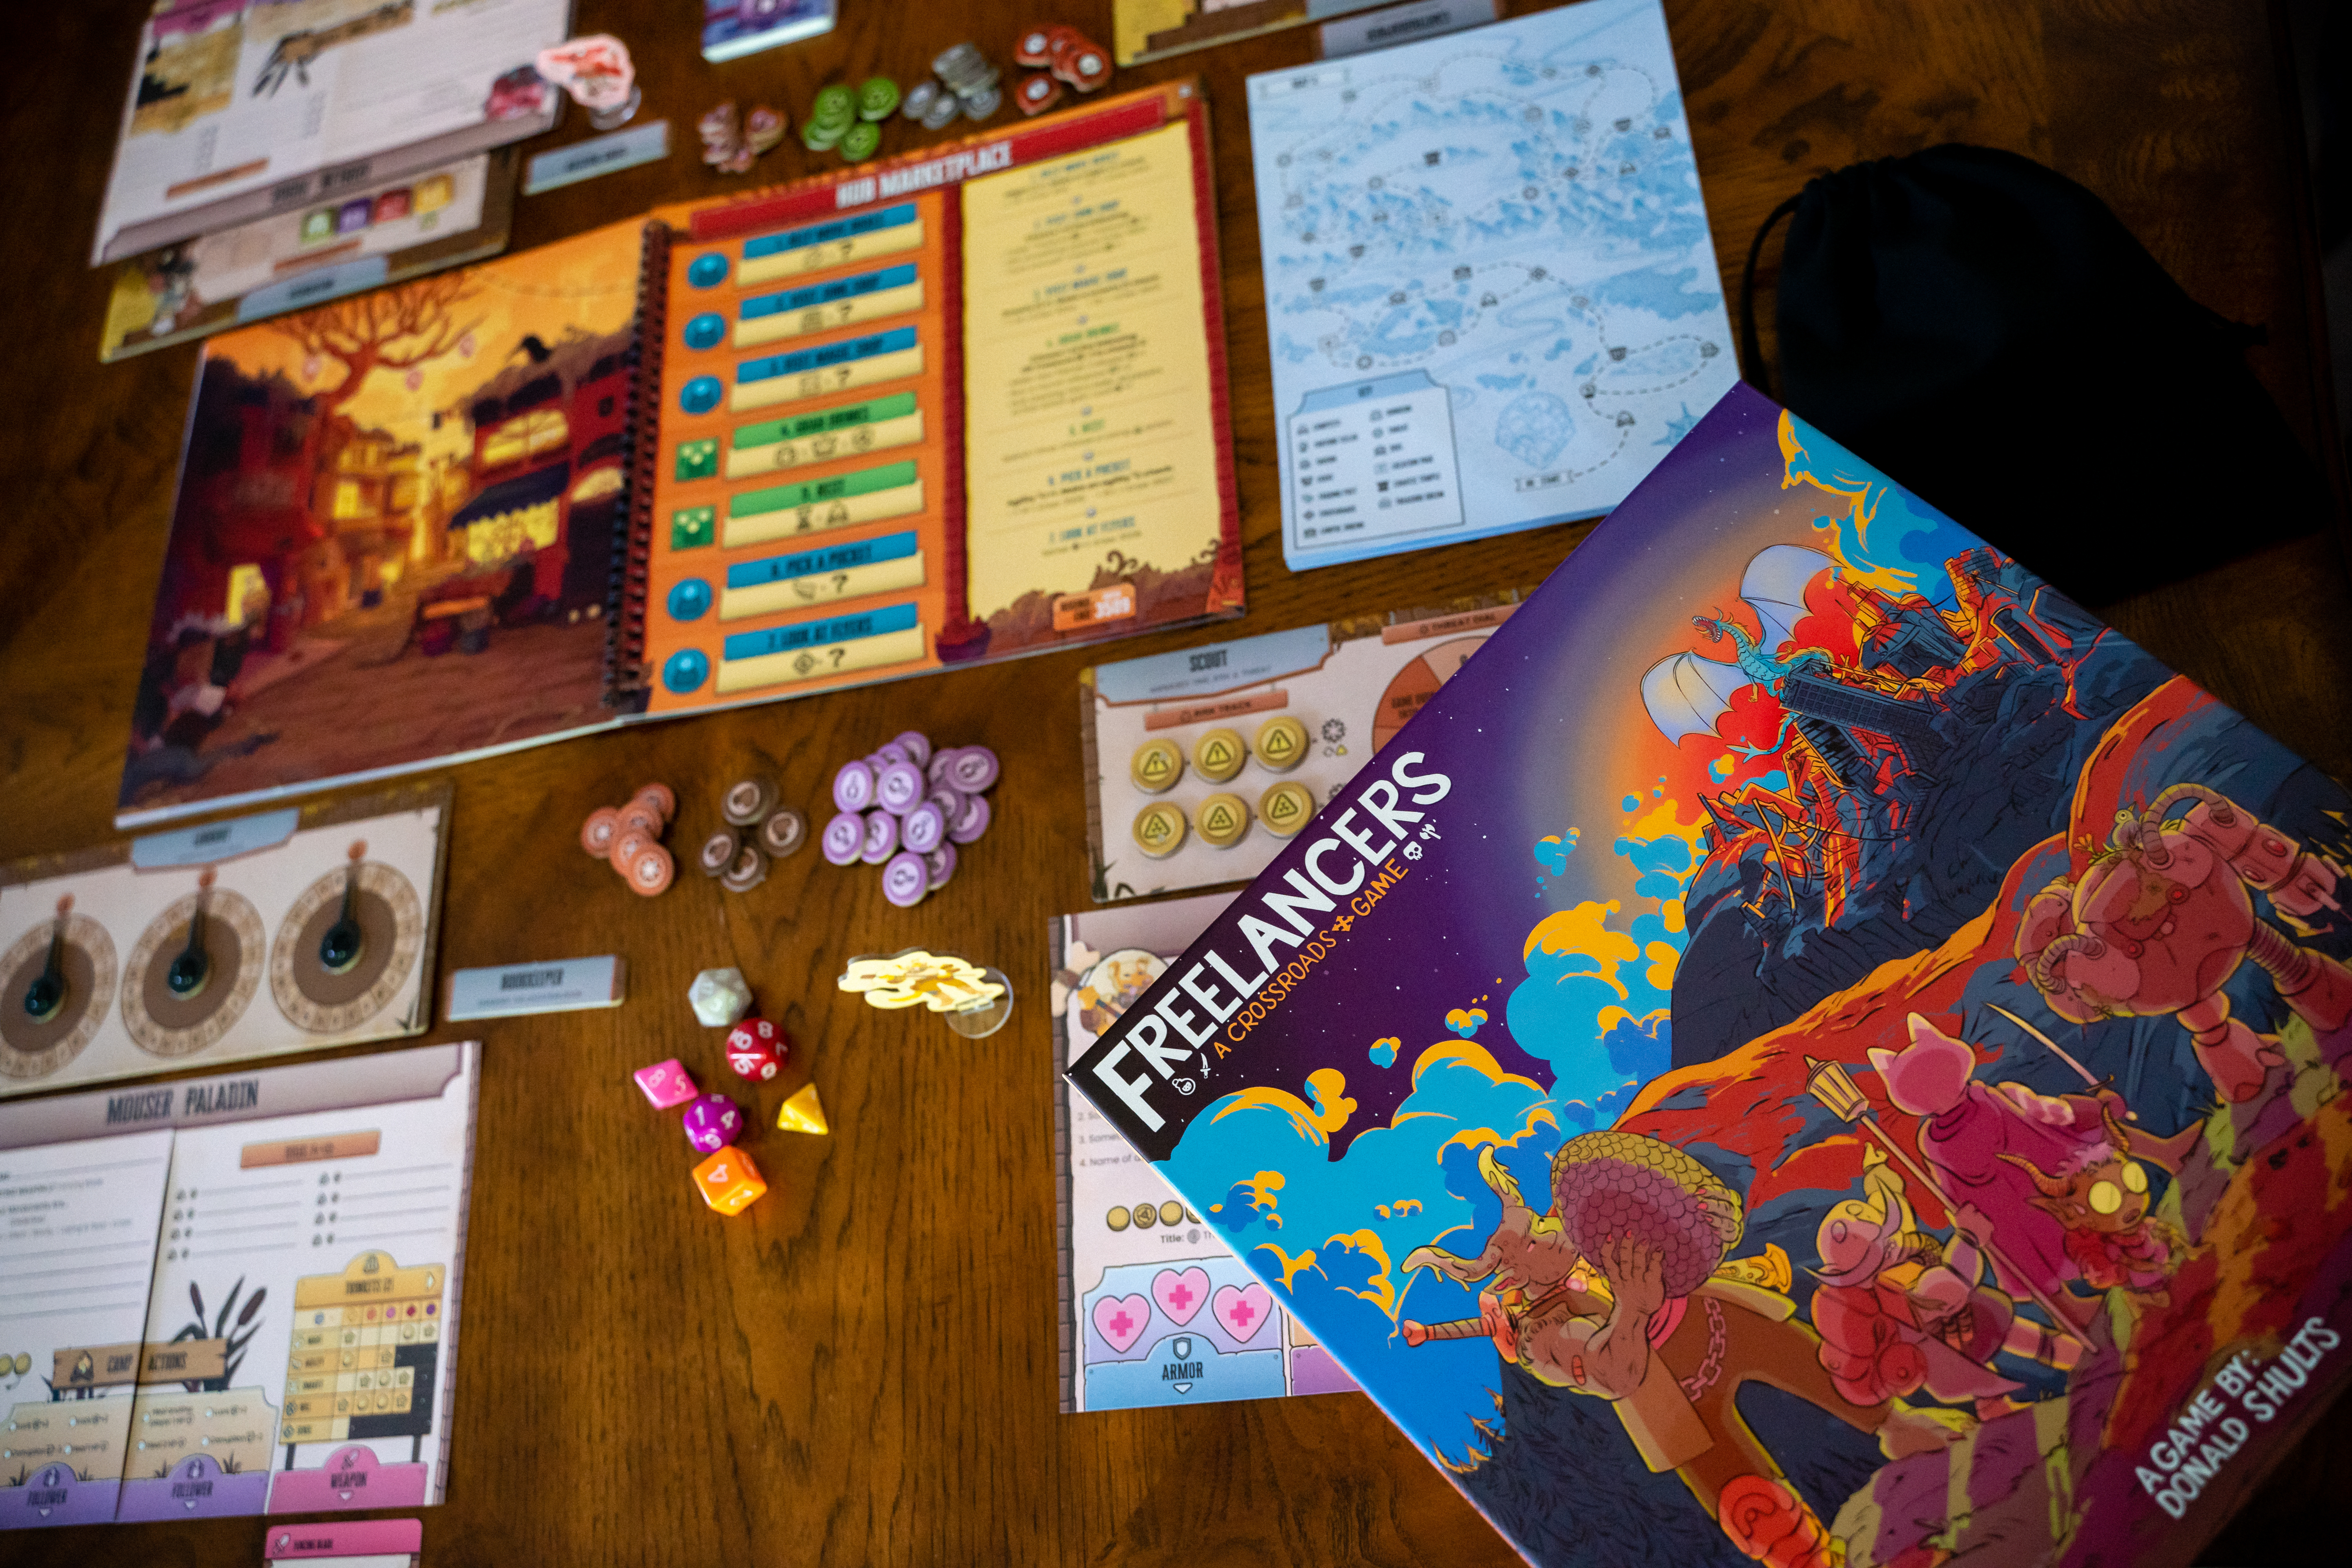 Freelancers: A Crossroads Game, Store